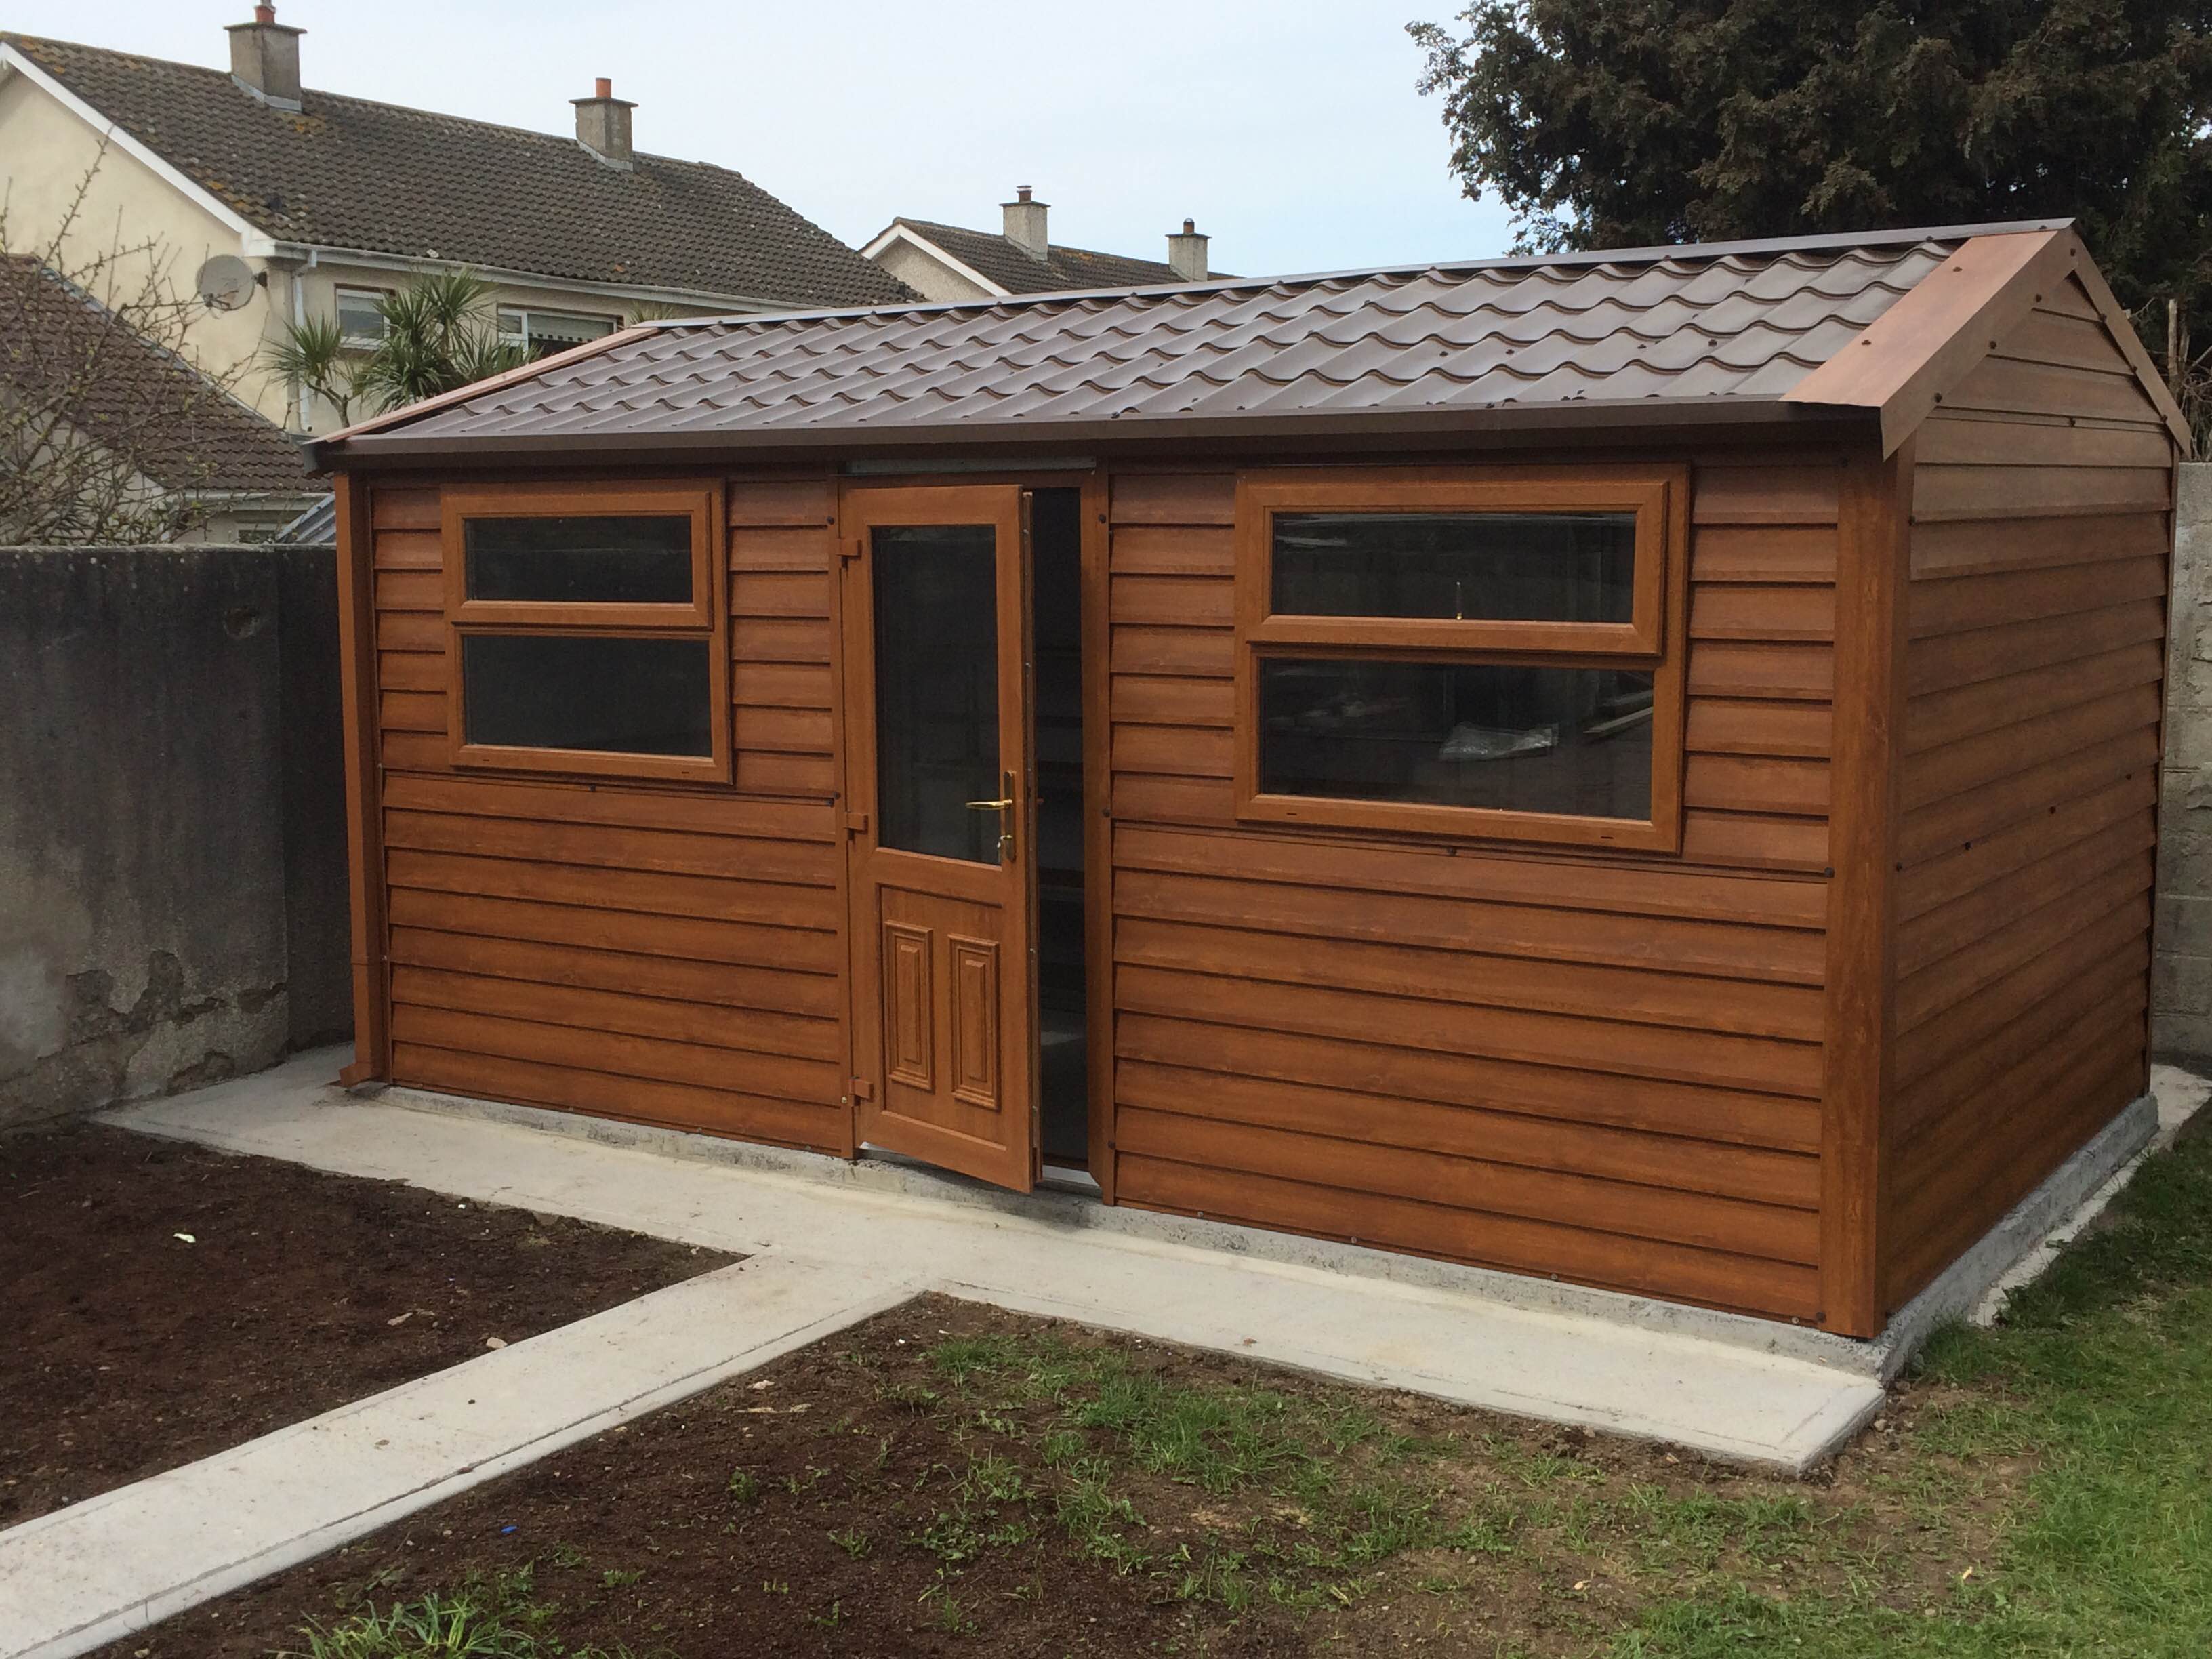 Insulated Garden Sheds in Ireland - Insulated Sheds - C ...